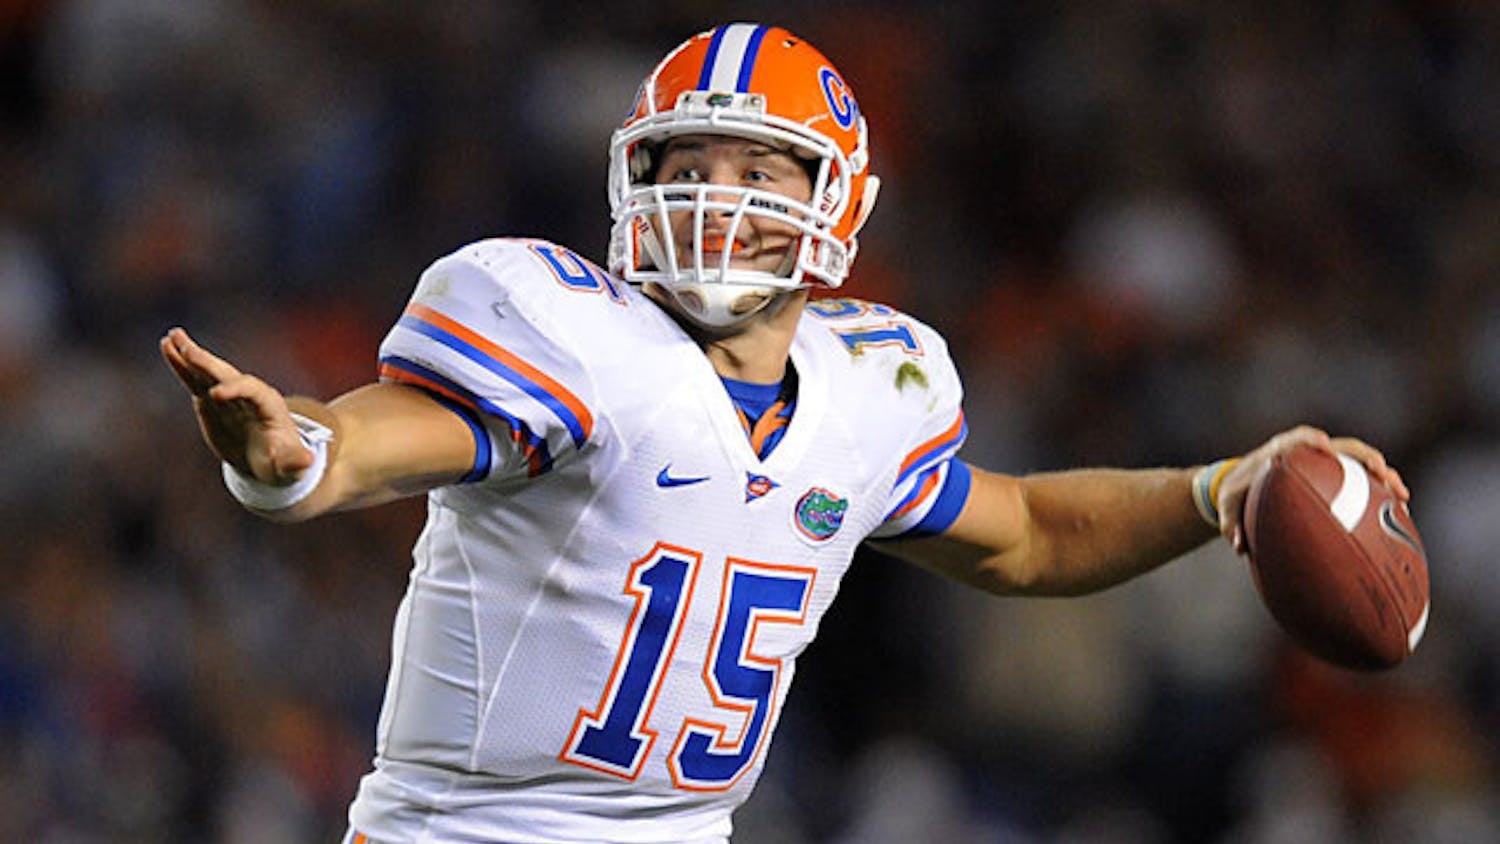 Former Florida quarterback Tim Tebow was listed on the College Football Hall of Fame ballot Monday, June 6, 2022.